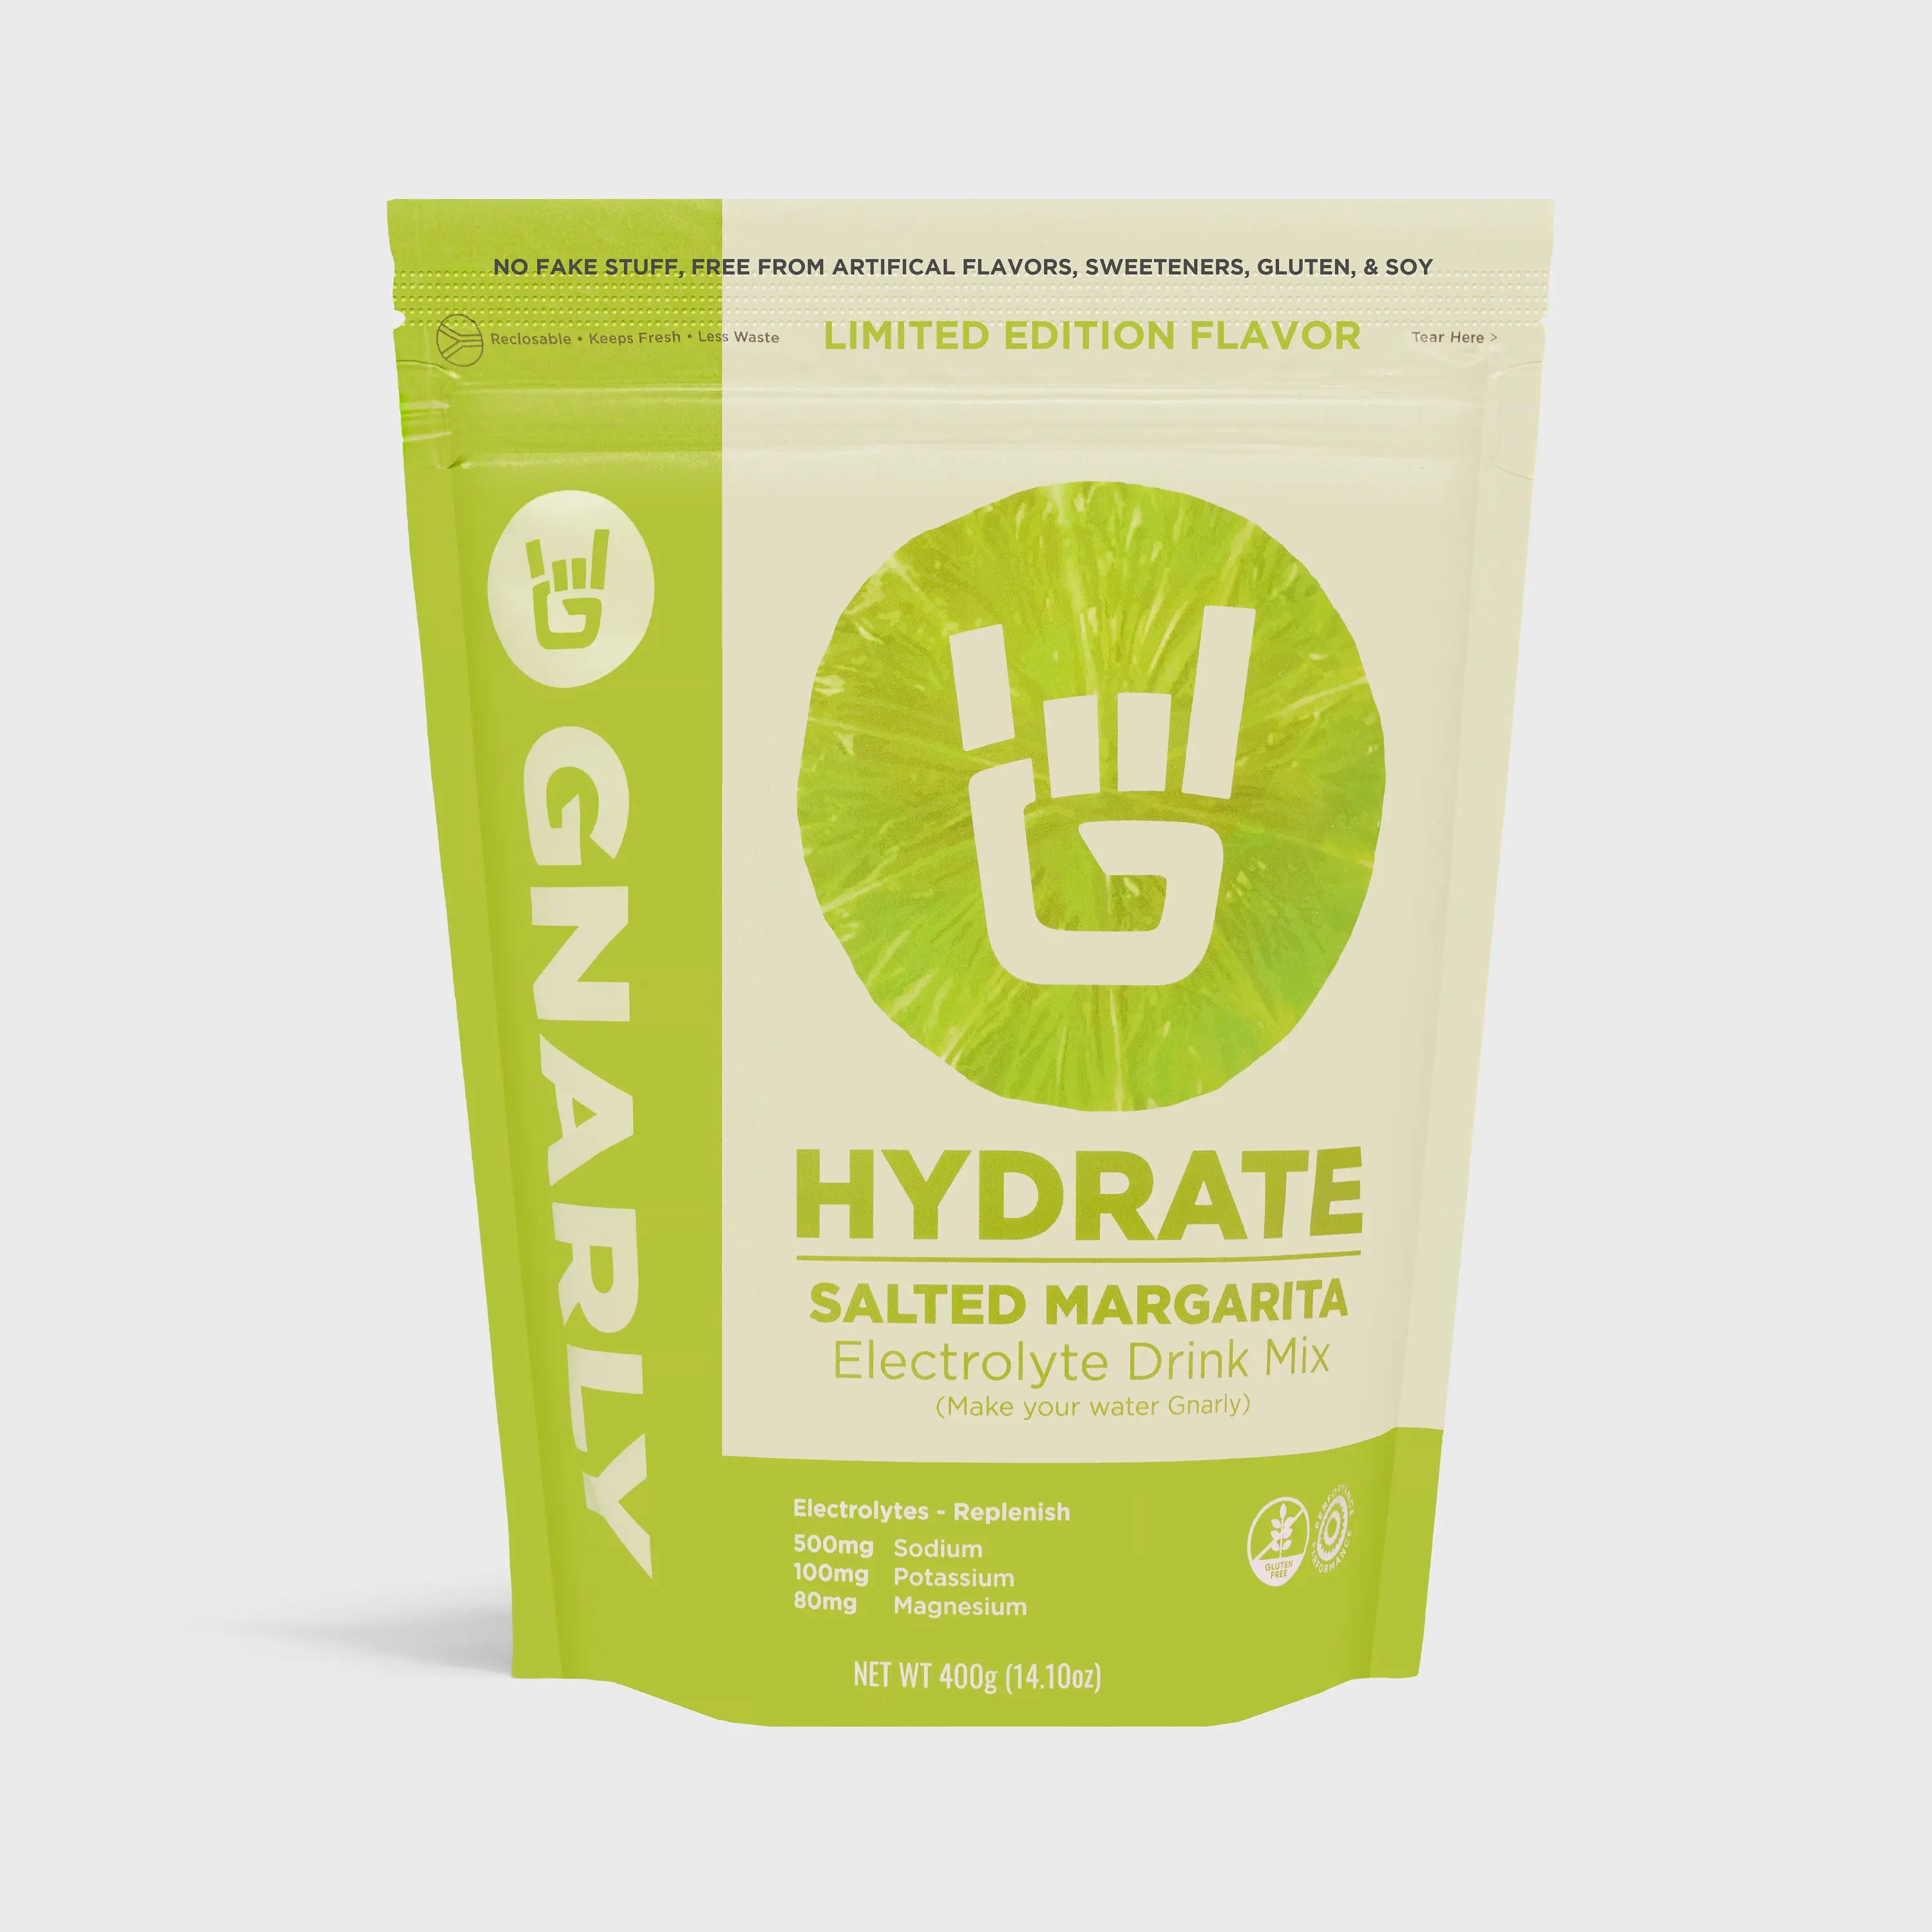 gnarly-hydrate-limited-edition-flavor-salted-margarita-extra-sodium